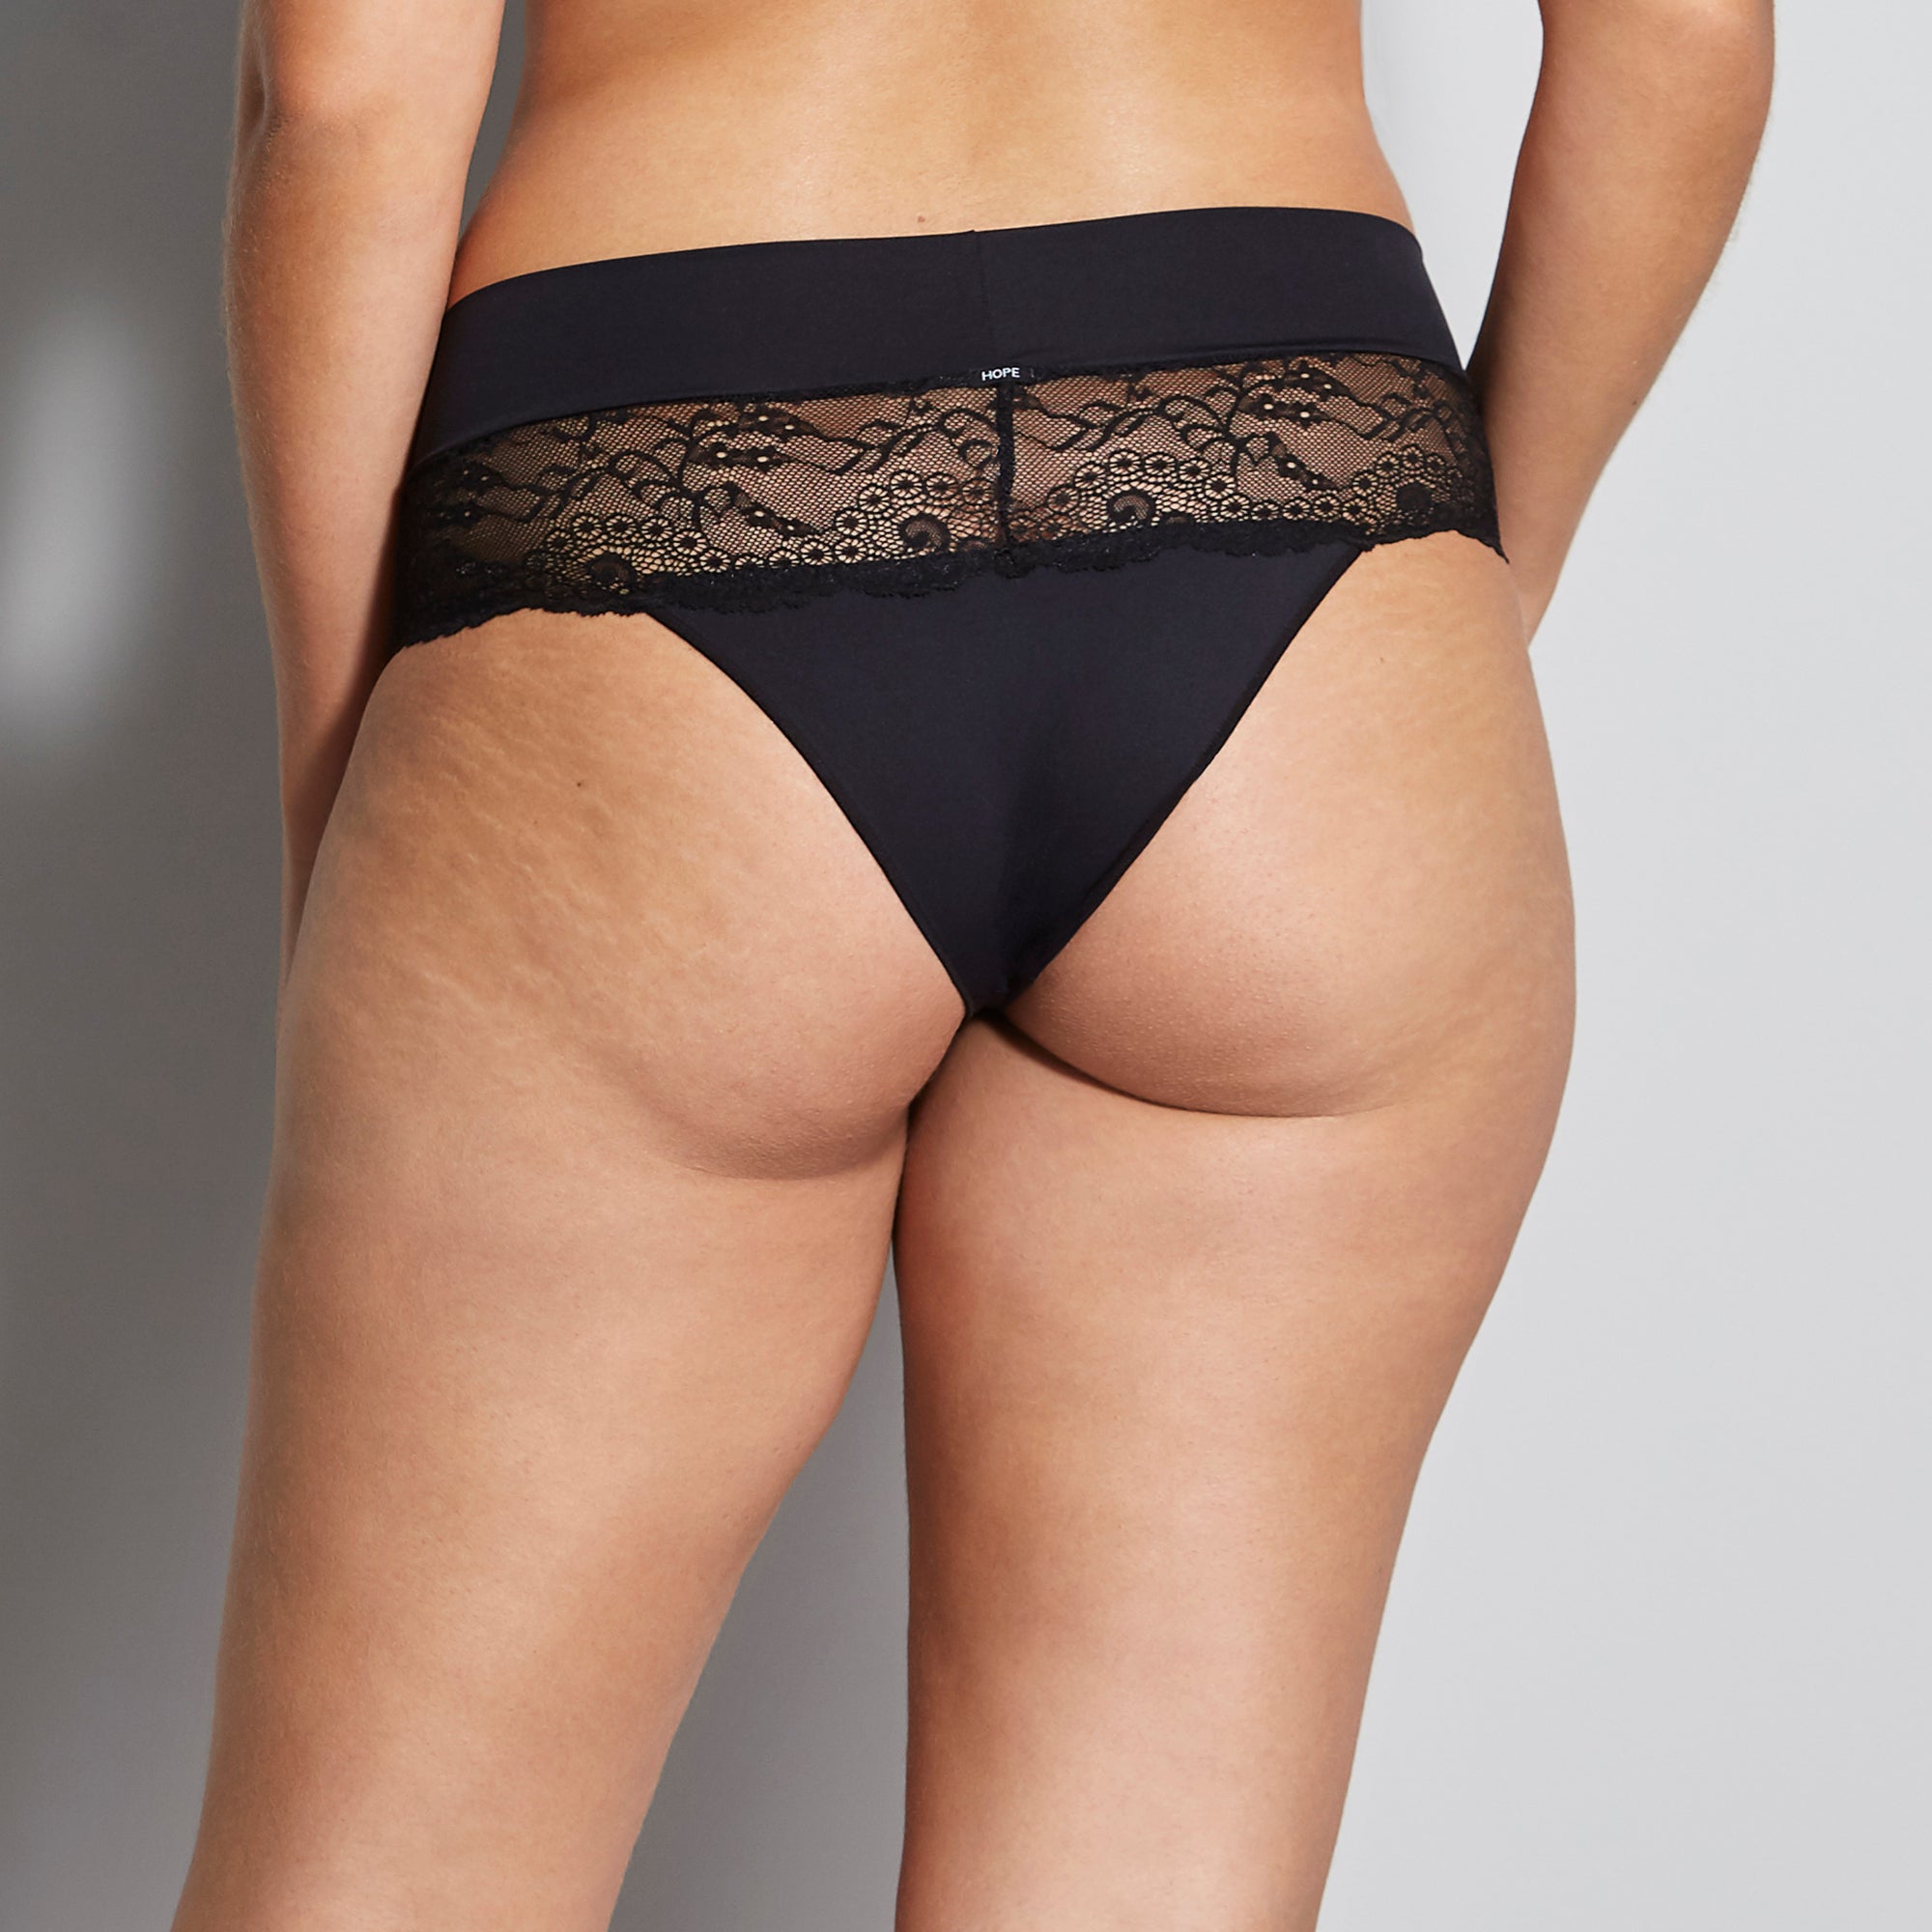 Microfiber and Lace Trim String Panty - Rosy Cheeks